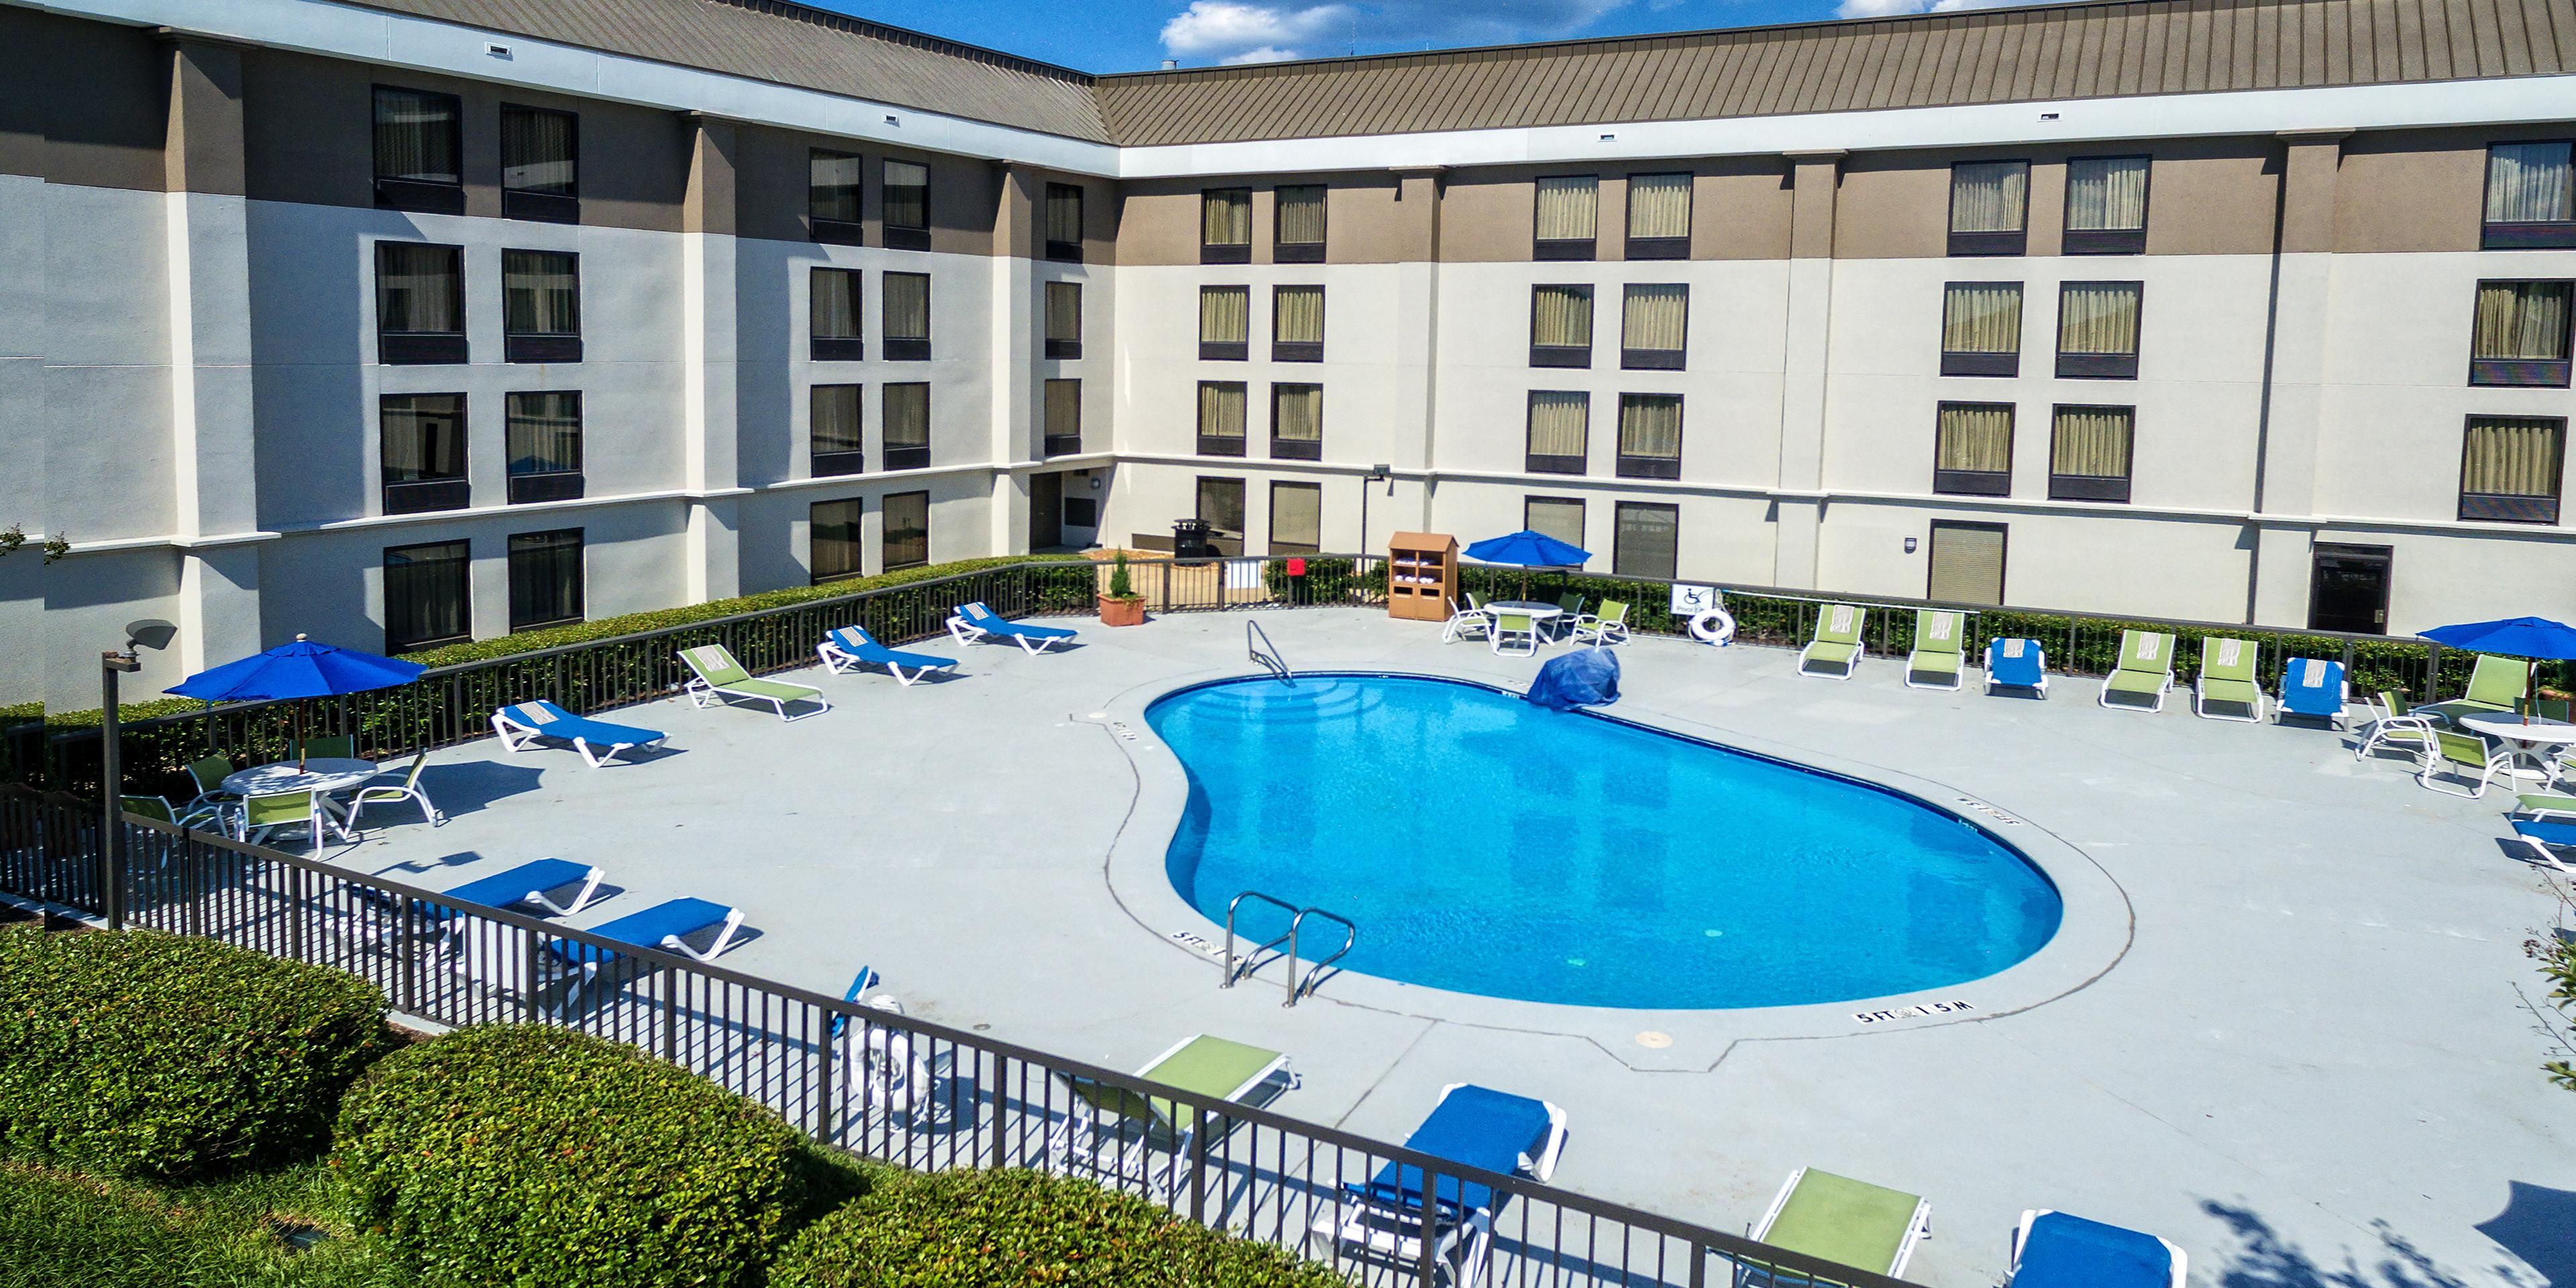 Our outdoor pool gives you the ability to relax and unwind while you are in Memphis. If you want to explore the area, our hotel is near some of Memphis's best attractions including Sun Studio, Overton Park, the Memphis Zoo, Liberty Bowl Stadium, and the Children's Museum.  